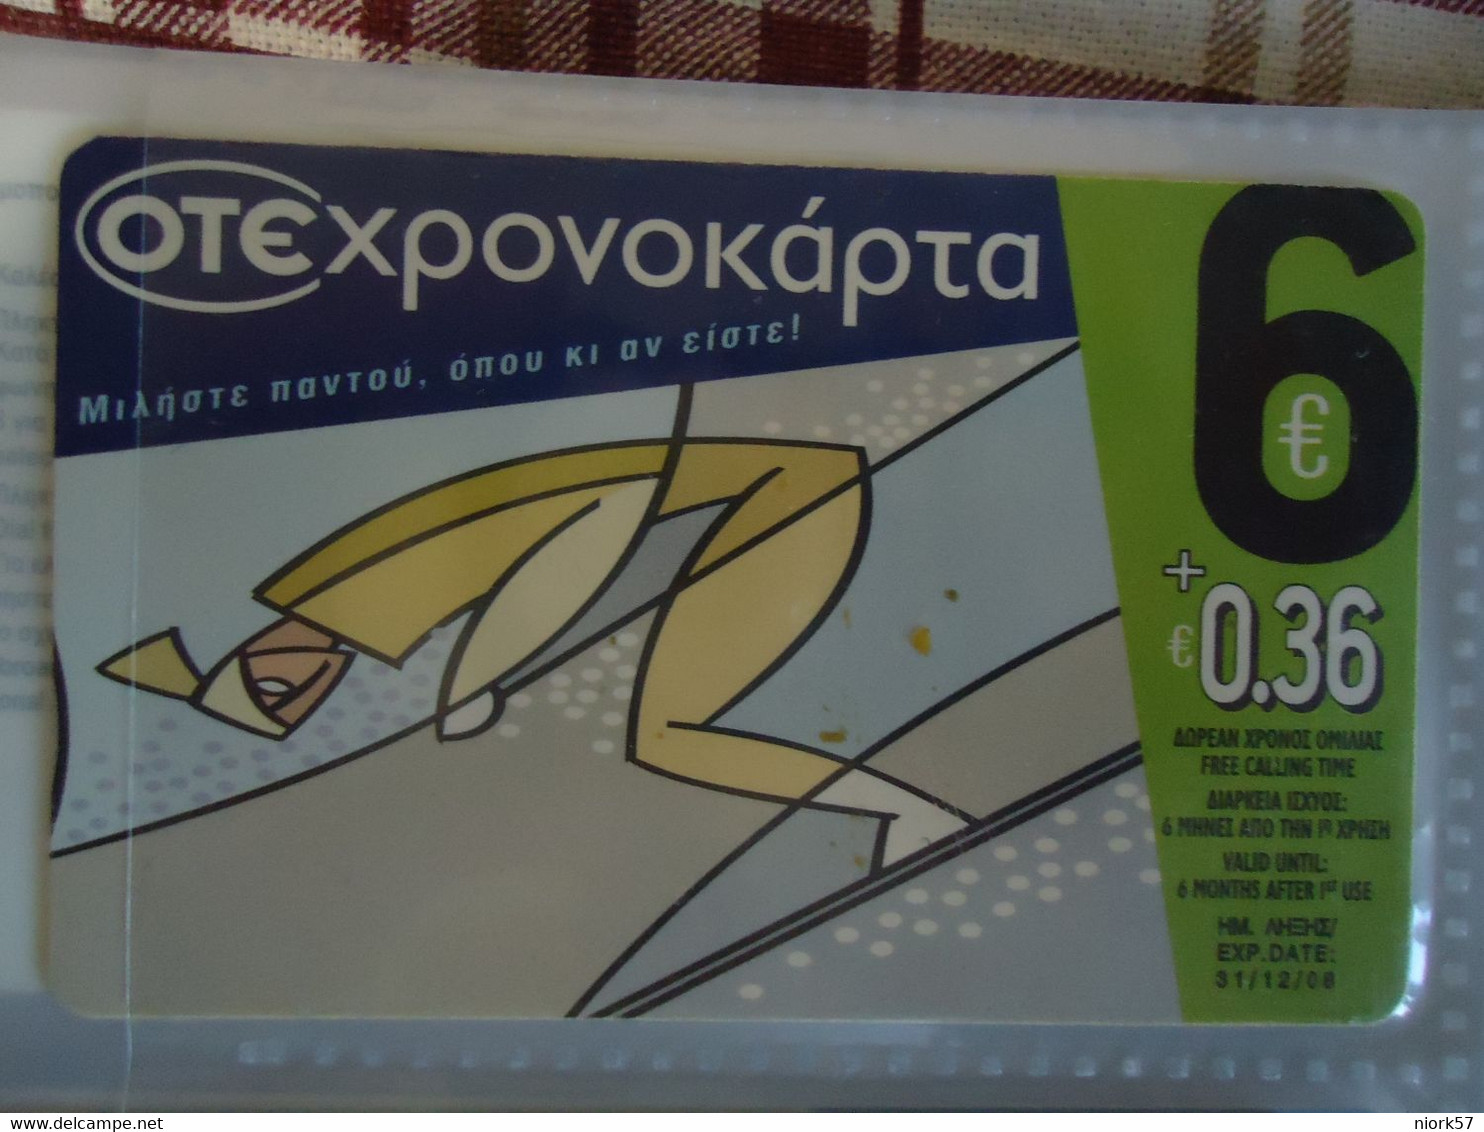 GREECE USED PREPAID CARDS SPORT OLYMPIC GAMES ATHENS 2004 - Olympische Spiele